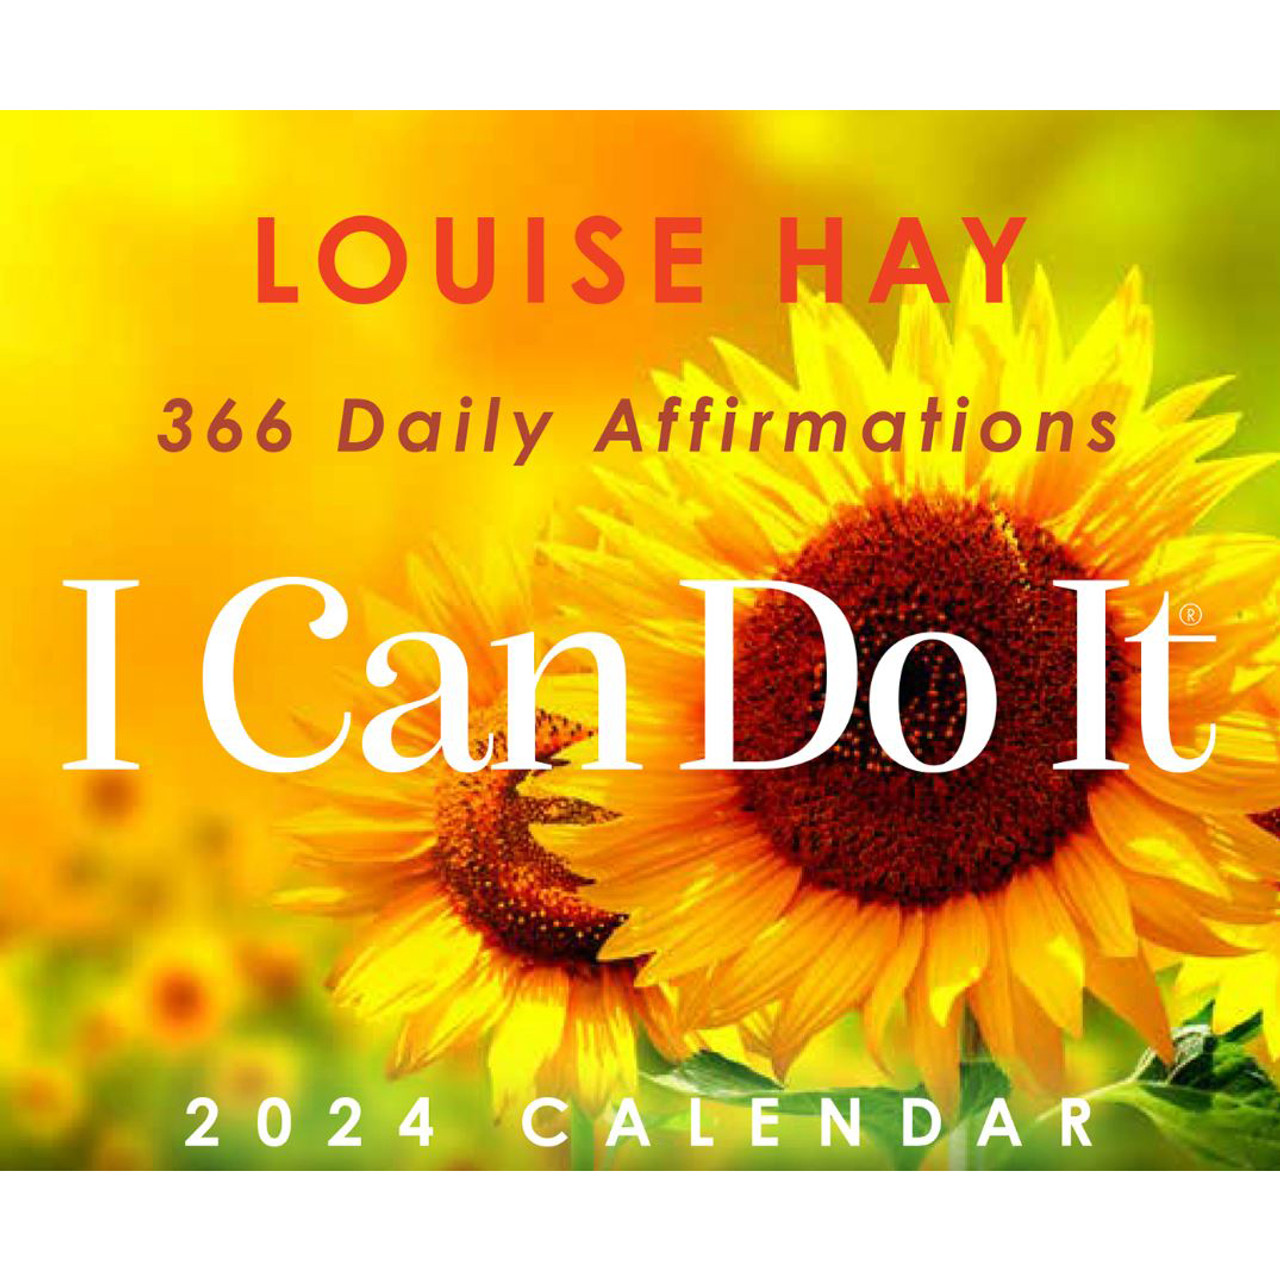 You Can Heal Your Life 2024 Wall Calendar: by Louise L. Hay